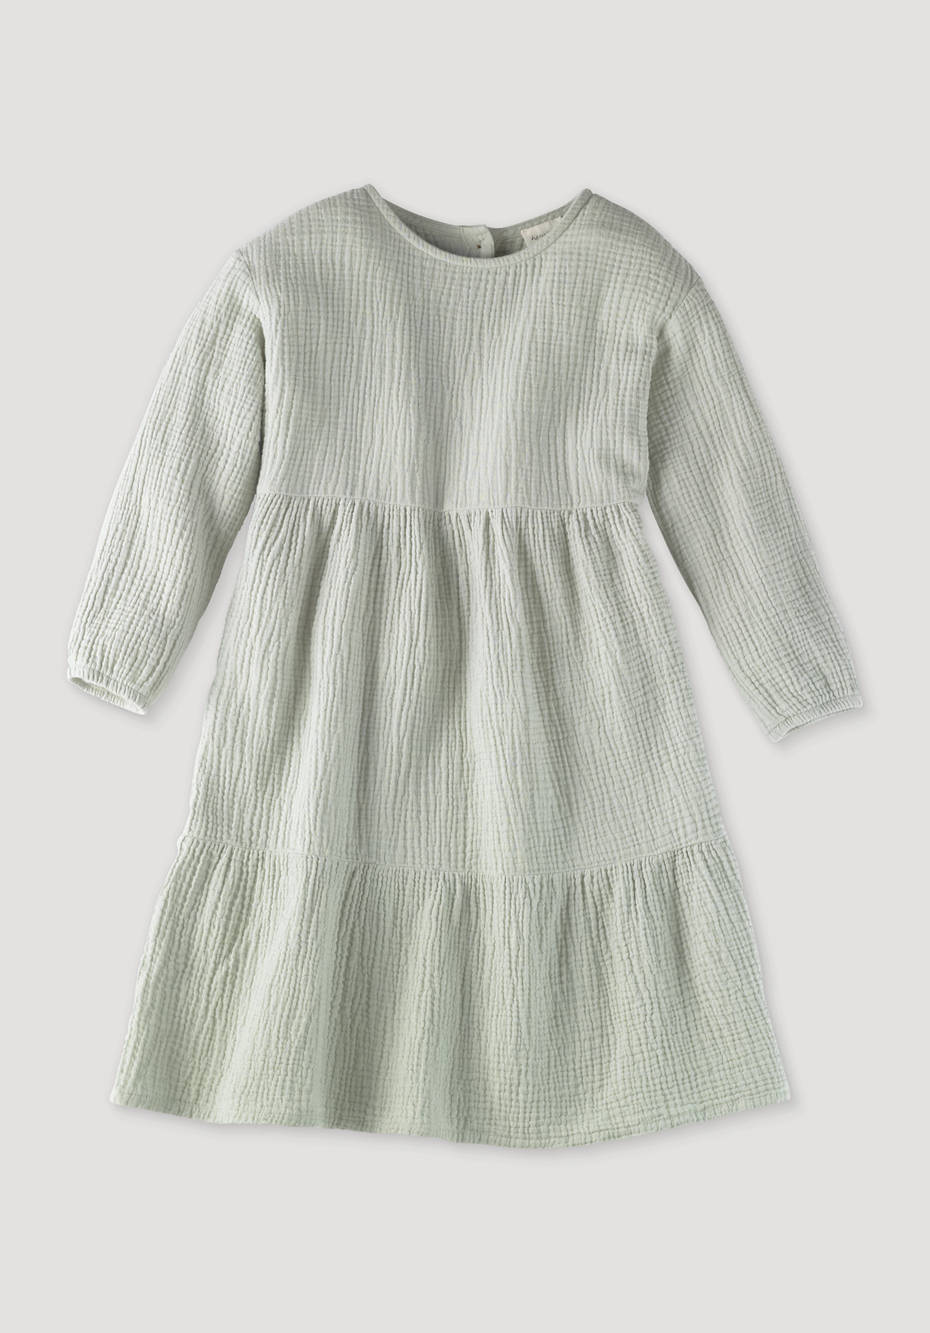 Flounce dress made from pure organic cotton